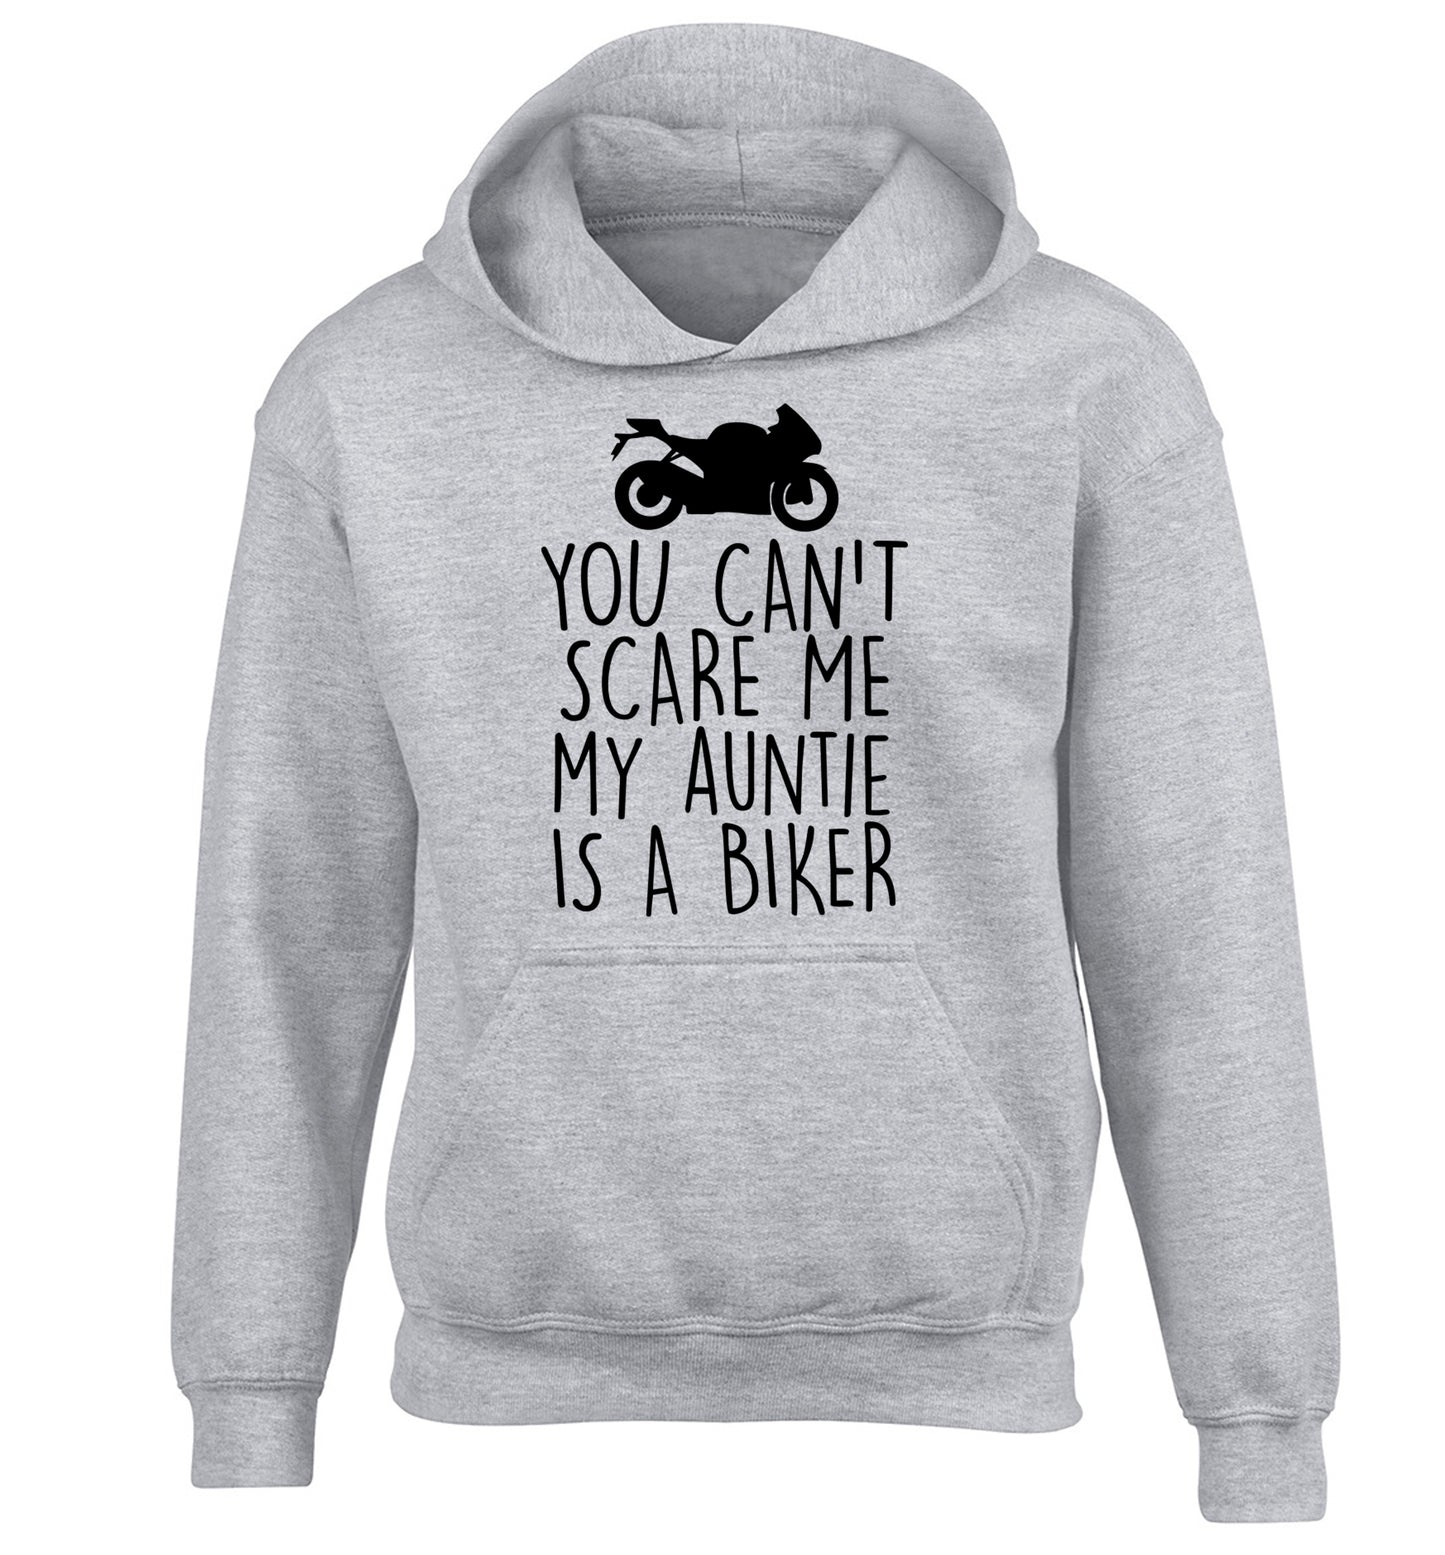 You can't scare me my auntie is a biker children's grey hoodie 12-13 Years